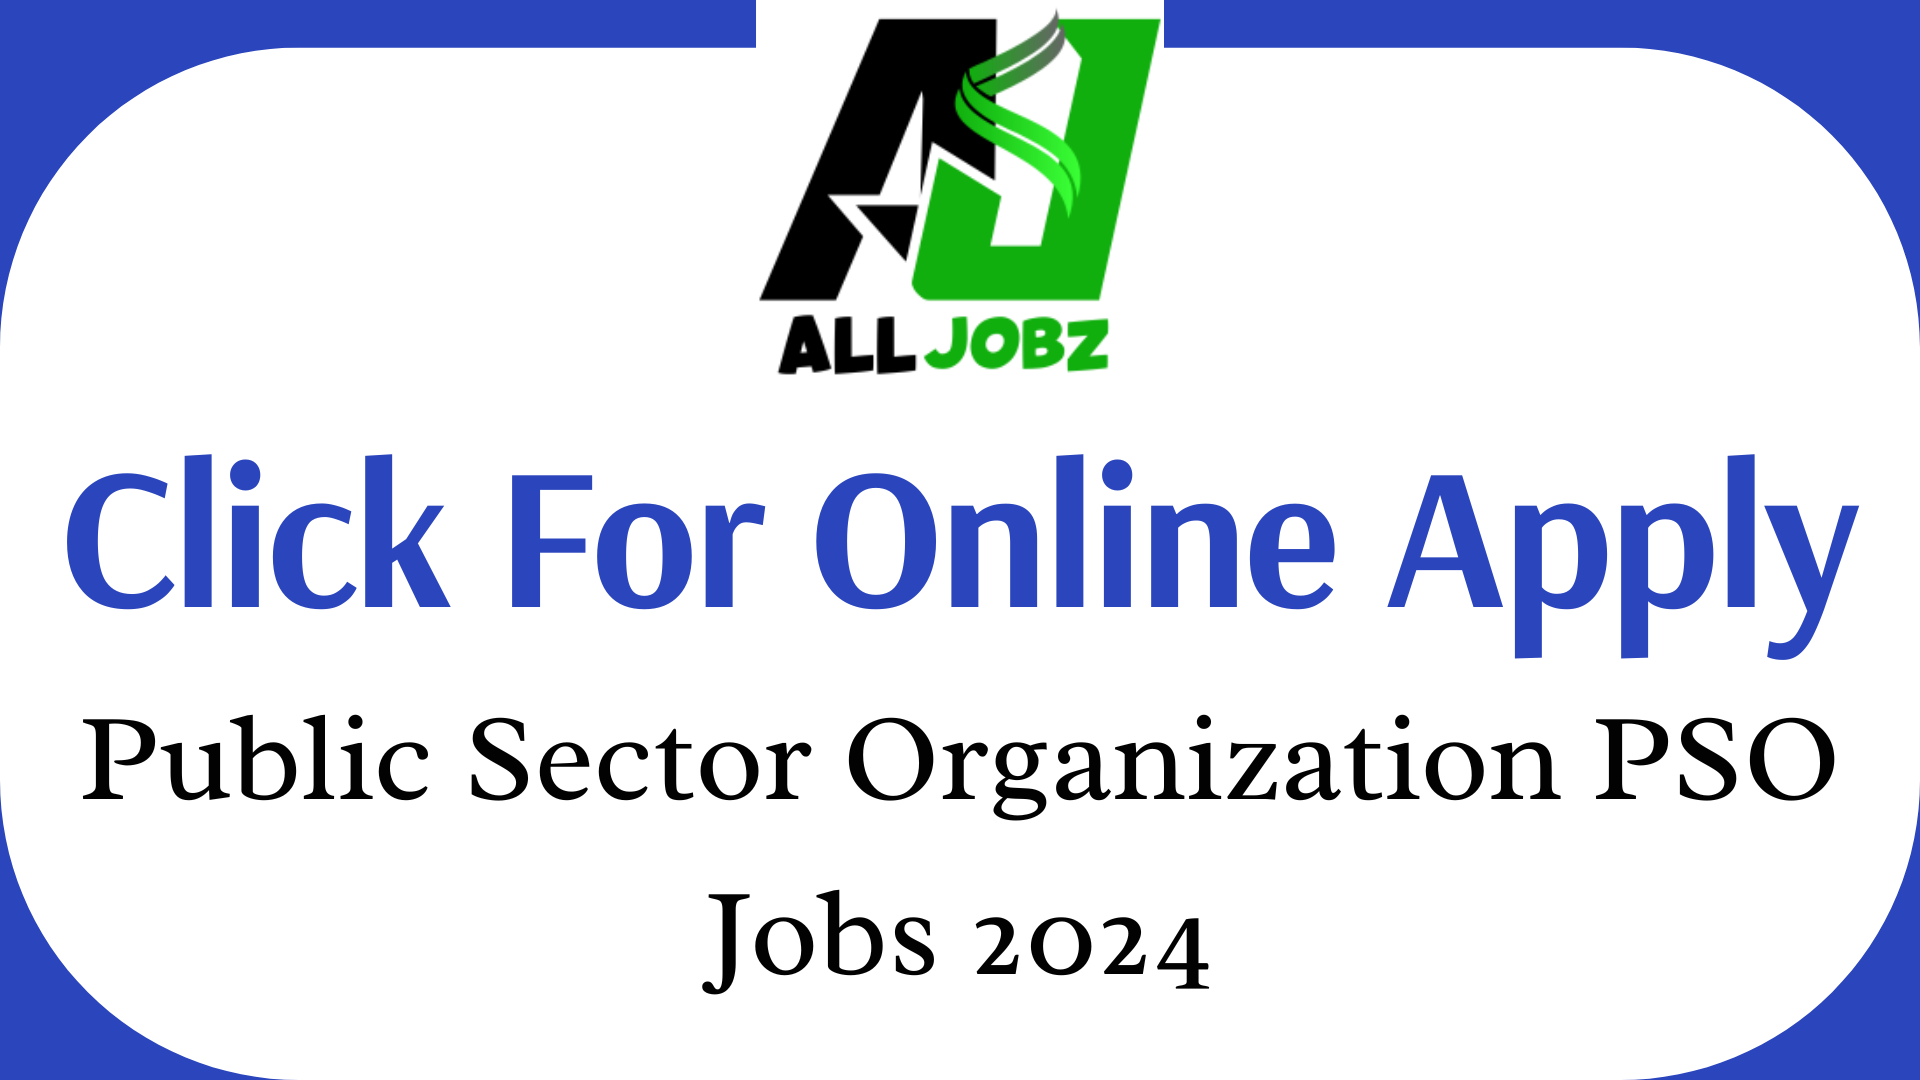 Job Opportunities At Public Sector Organization Pso For Digital Marketing Specialist And Crm Executive, Public Sector Organization Pso Jobs In Sindh Salary, Public Sector Organization Pso Jobs In Sindh Apply Online, Pso Jobs Online Apply, Public Sector Organization Pso Jobs In Sindh Karachi, Pso Jobs Advertisement, How To Apply For Pso Job, Pso Jobs 2024, Pso Jobs 2024 Online Apply